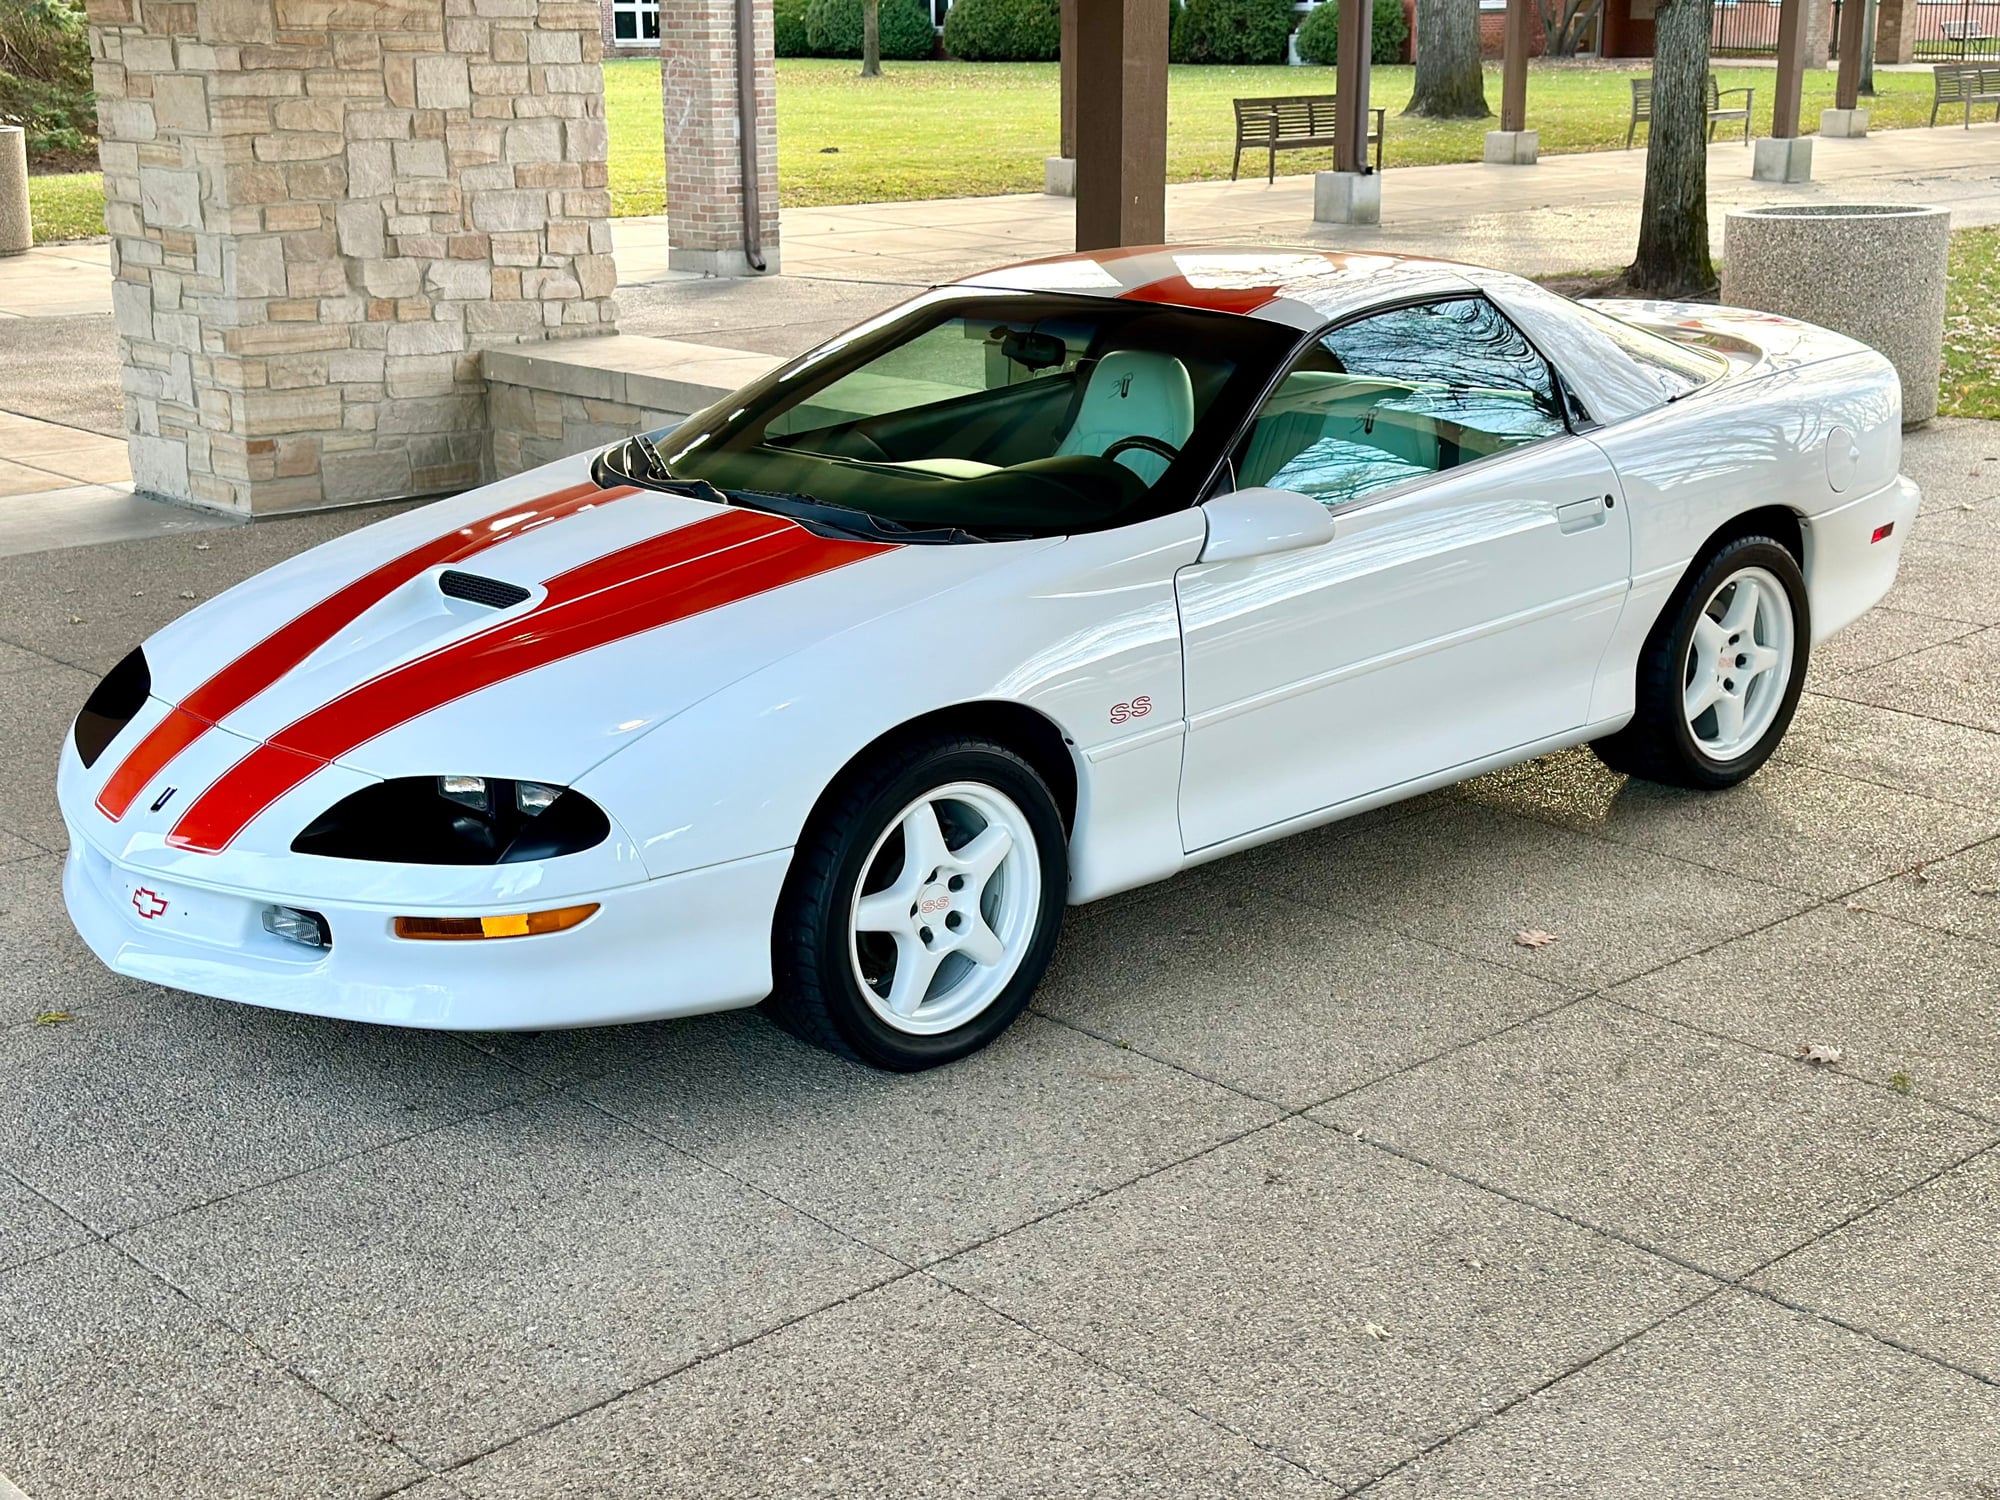 1997 Chevrolet Camaro - 1997 Camaro SS Anniversary Hardtop Manual No Mods 17k miles - Used - VIN 2G1FP22P2V2129500 - 17,300 Miles - 8 cyl - 2WD - Manual - Coupe - White - Palos Heights, IL 60463, United States